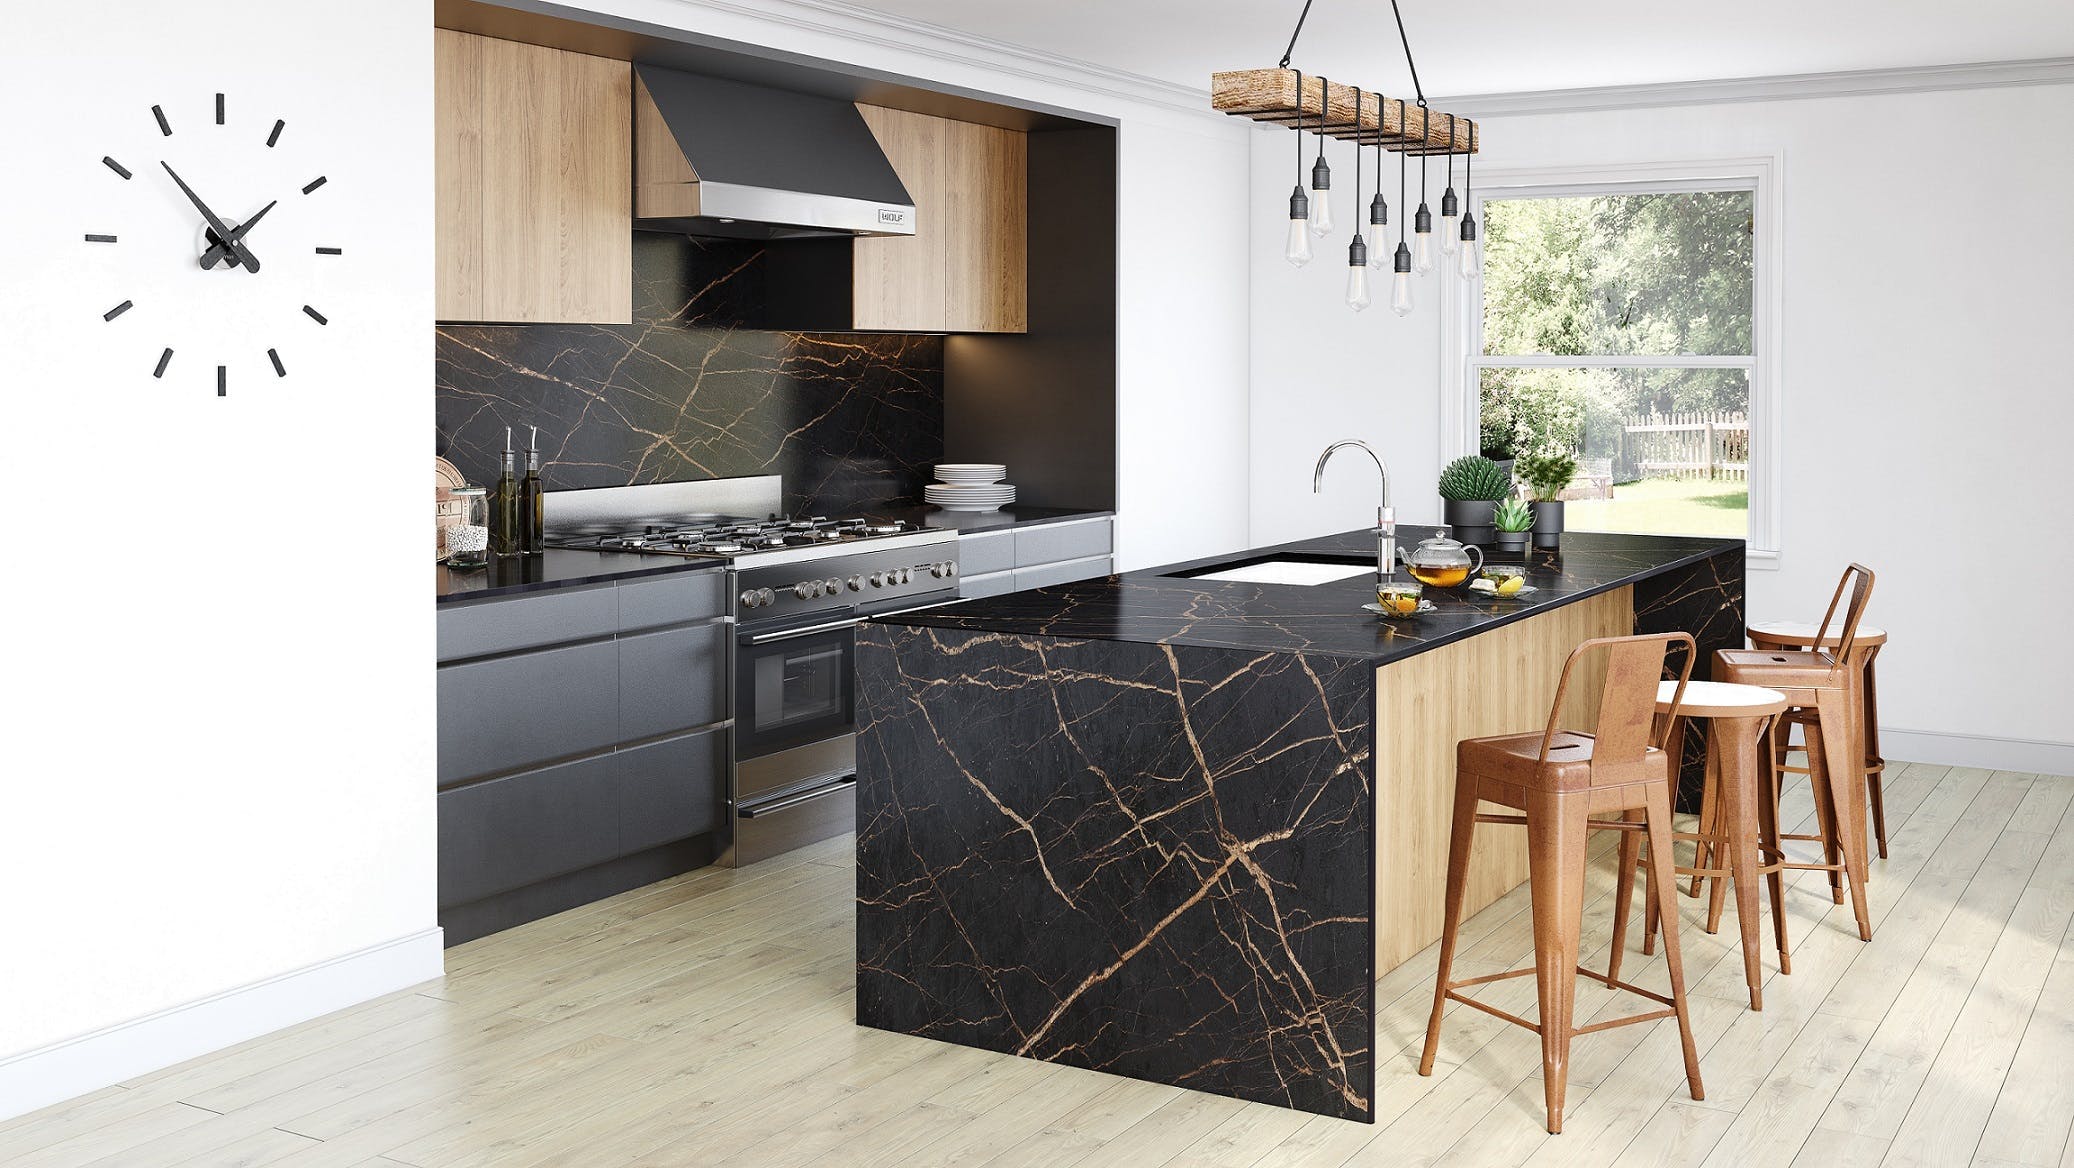 Image of Dekton Avant Garde Laurent Kitchen in What should a kitchen budget include? - Cosentino